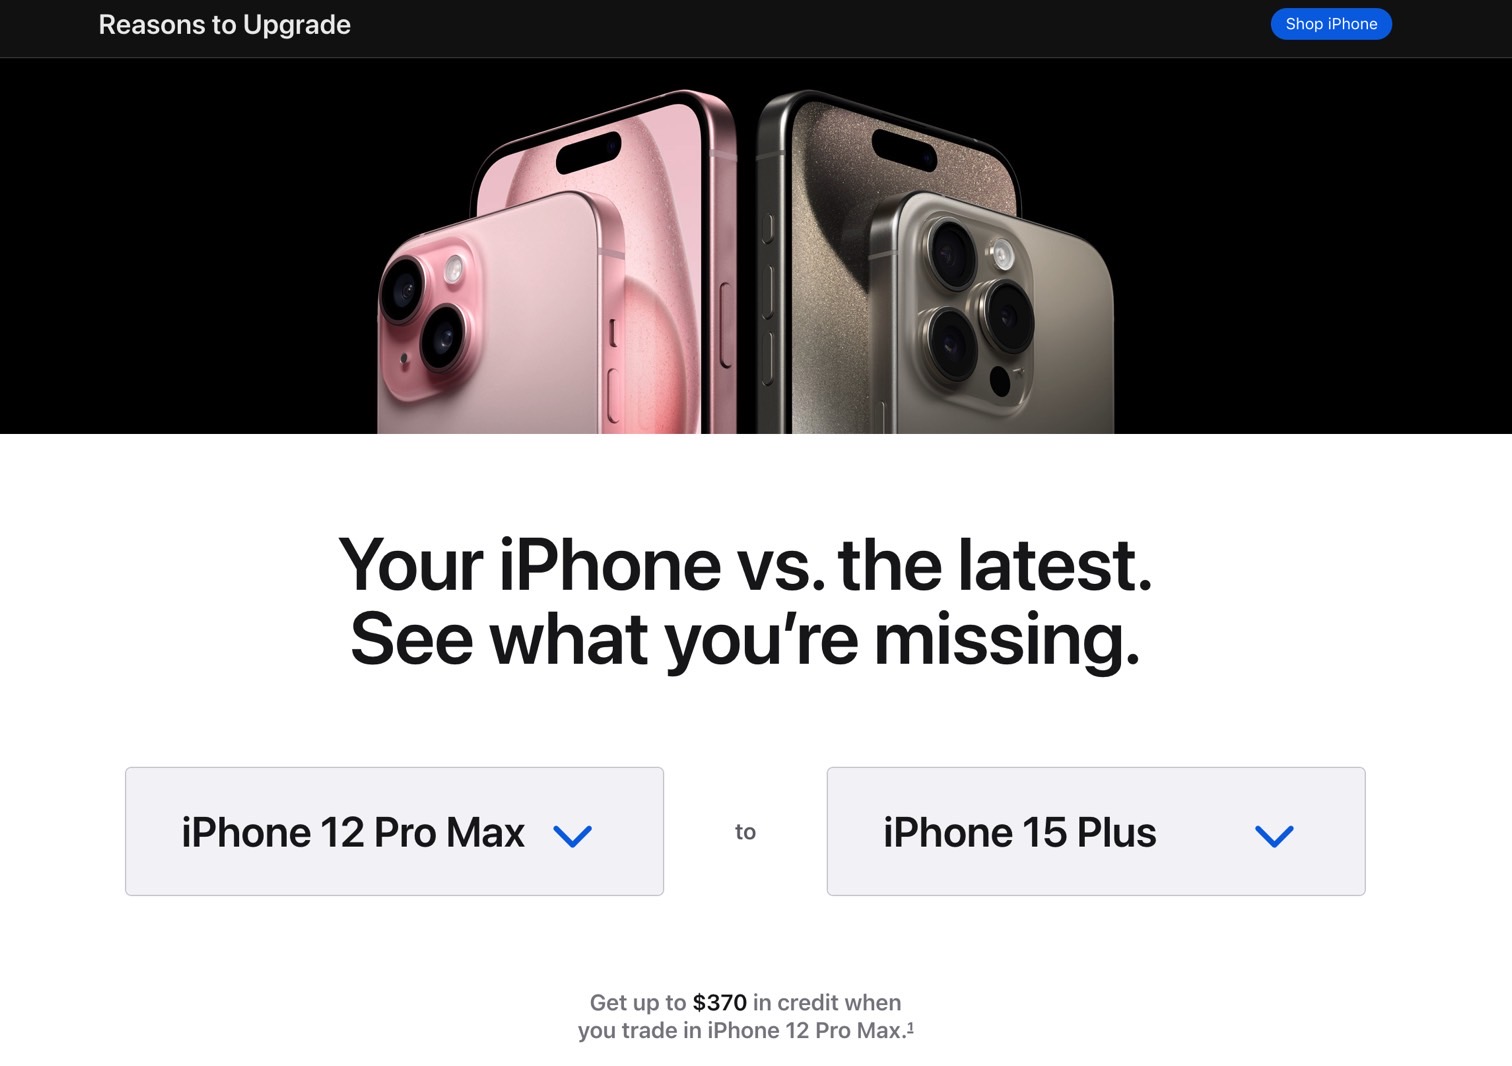 Apple's new Reasons to Upgrade tool lets you compare certain iPhone models.